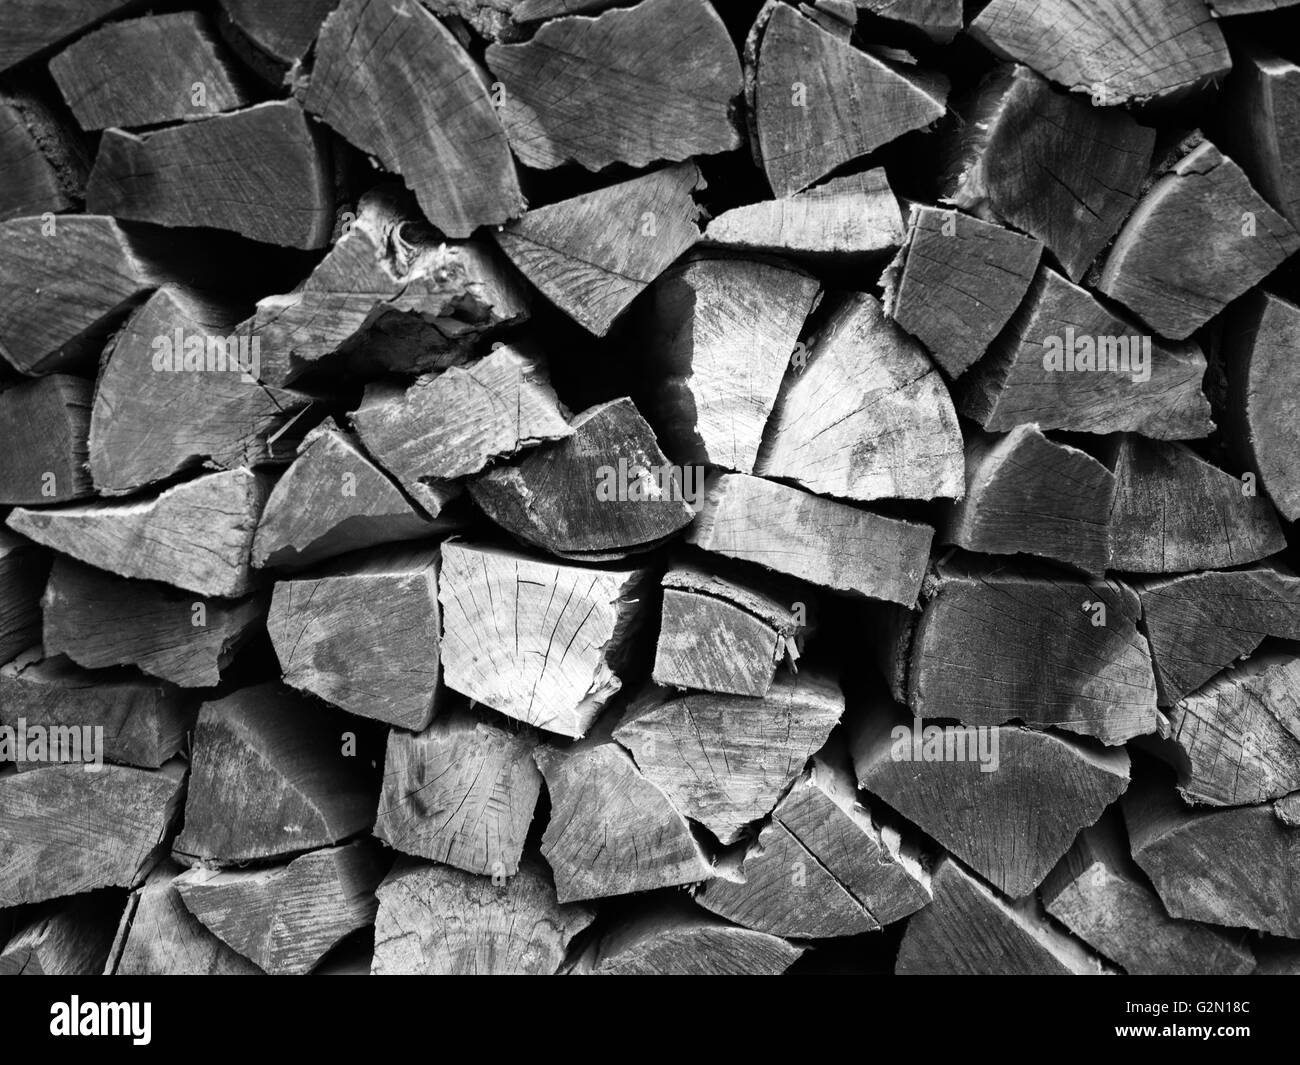 Pile of wood logs ready for winter - landscape exterior/ black and white Stock Photo